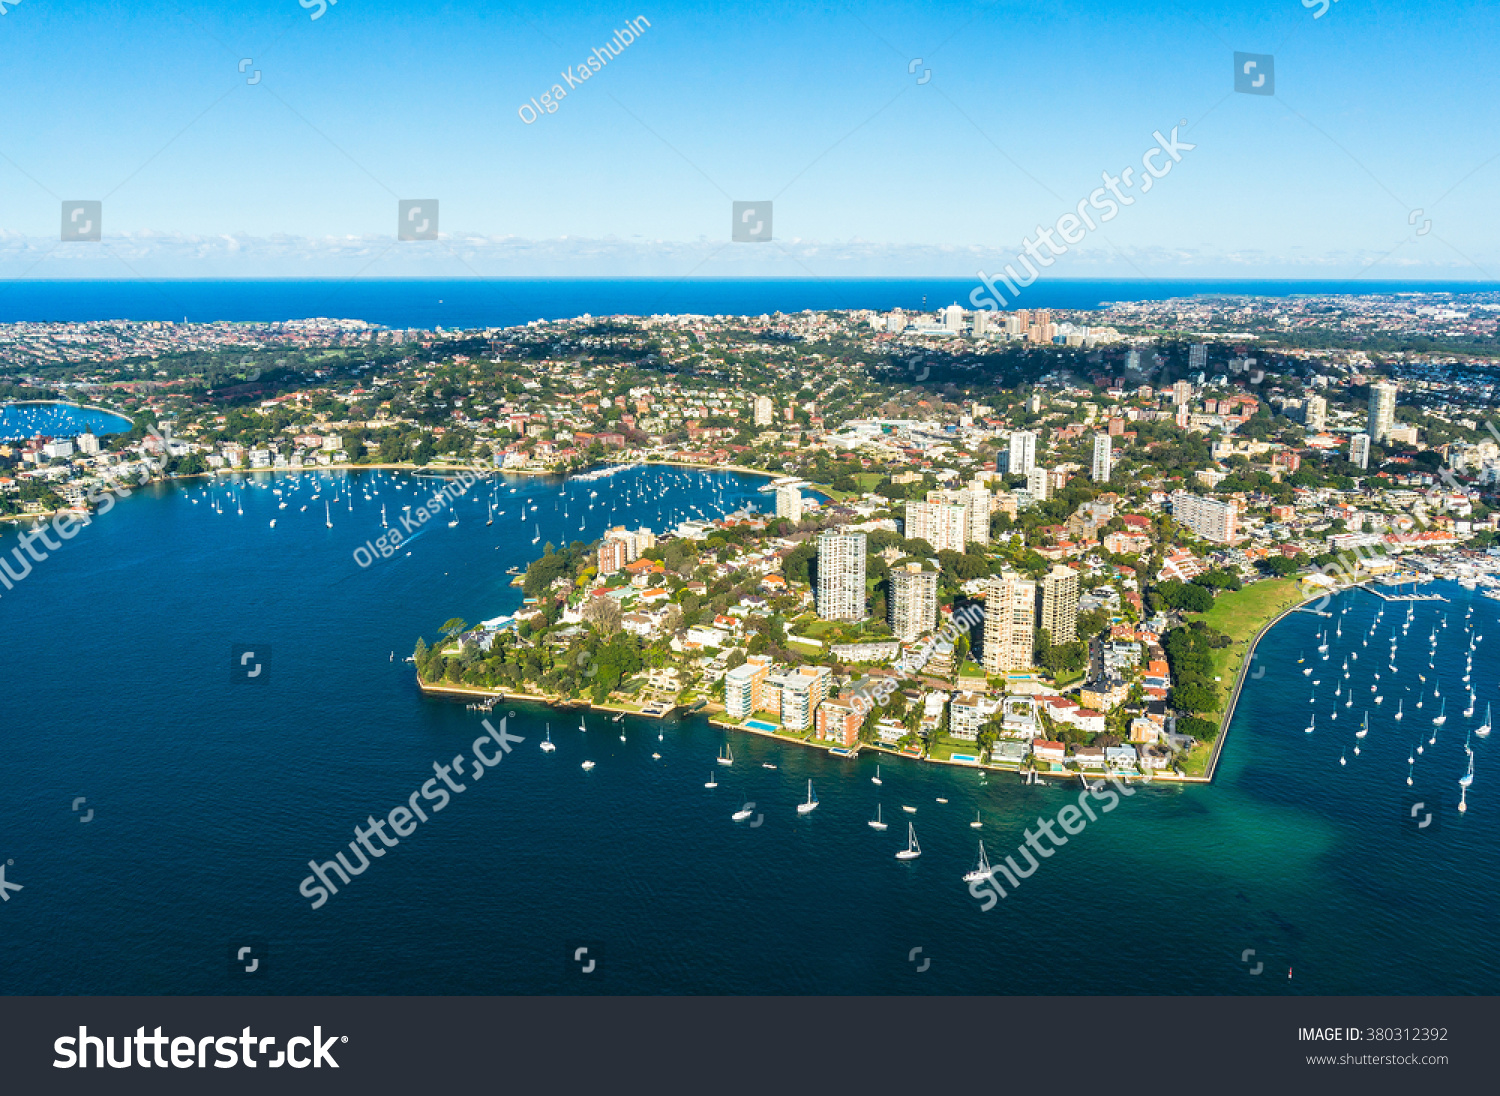 Aerial view Double bay, Sydney, Australia. View on Sydney harborside suburbs from above. Aerial view on Sydney harborside, Rushcutters bay, Double bay, Darling point,  Point piper, Darling point wharf #380312392